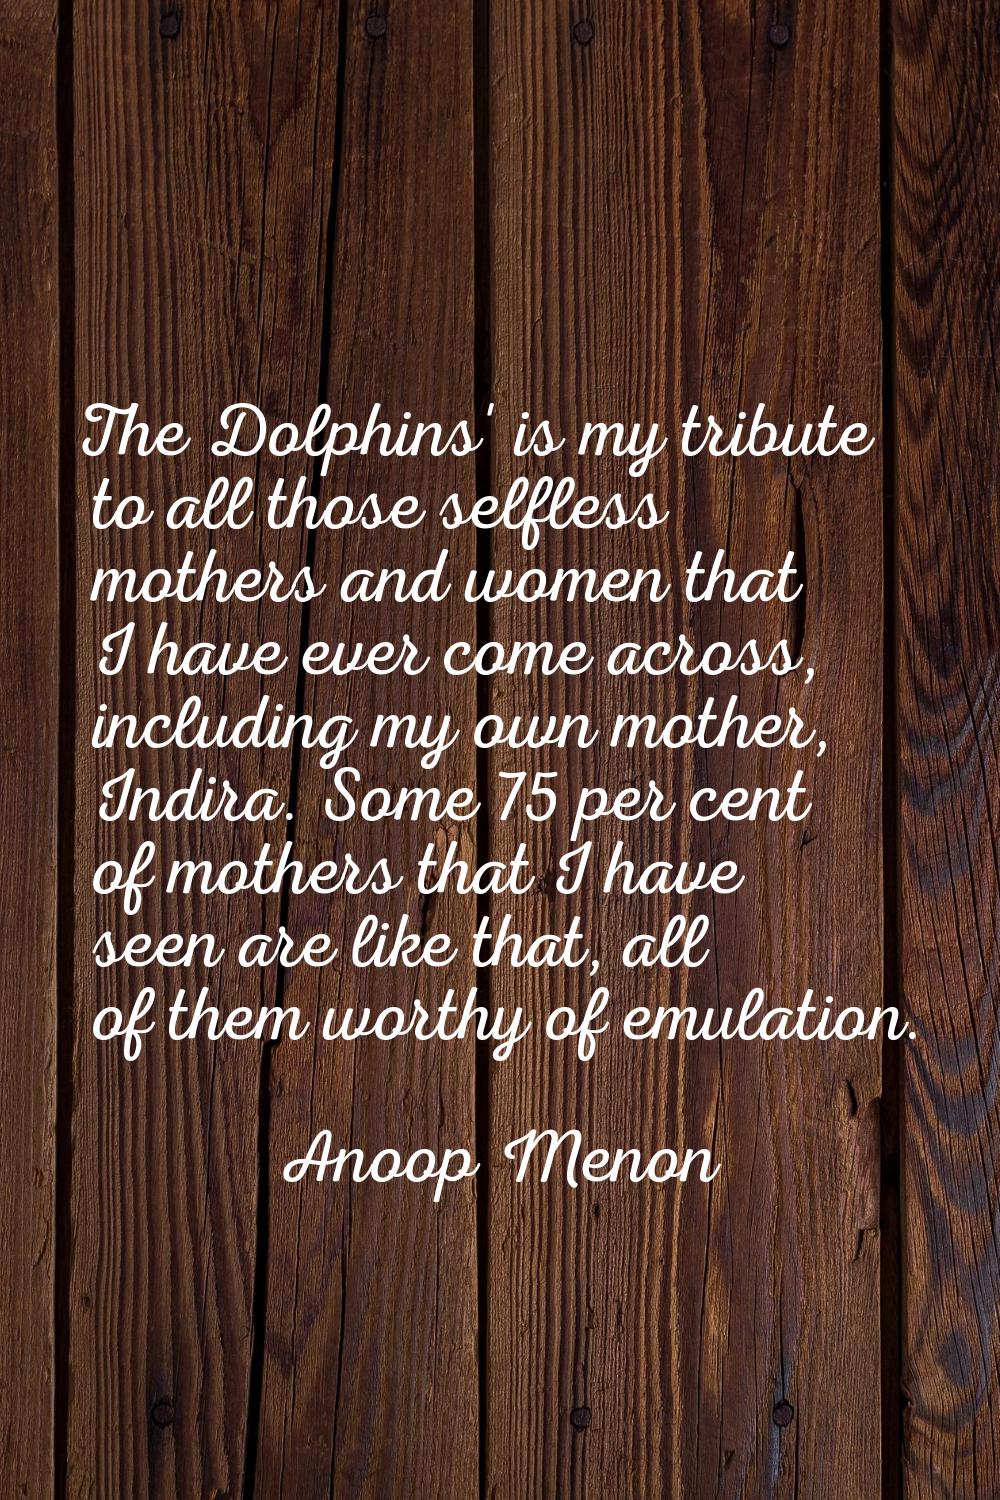 The Dolphins' is my tribute to all those selfless mothers and women that I have ever come across, i